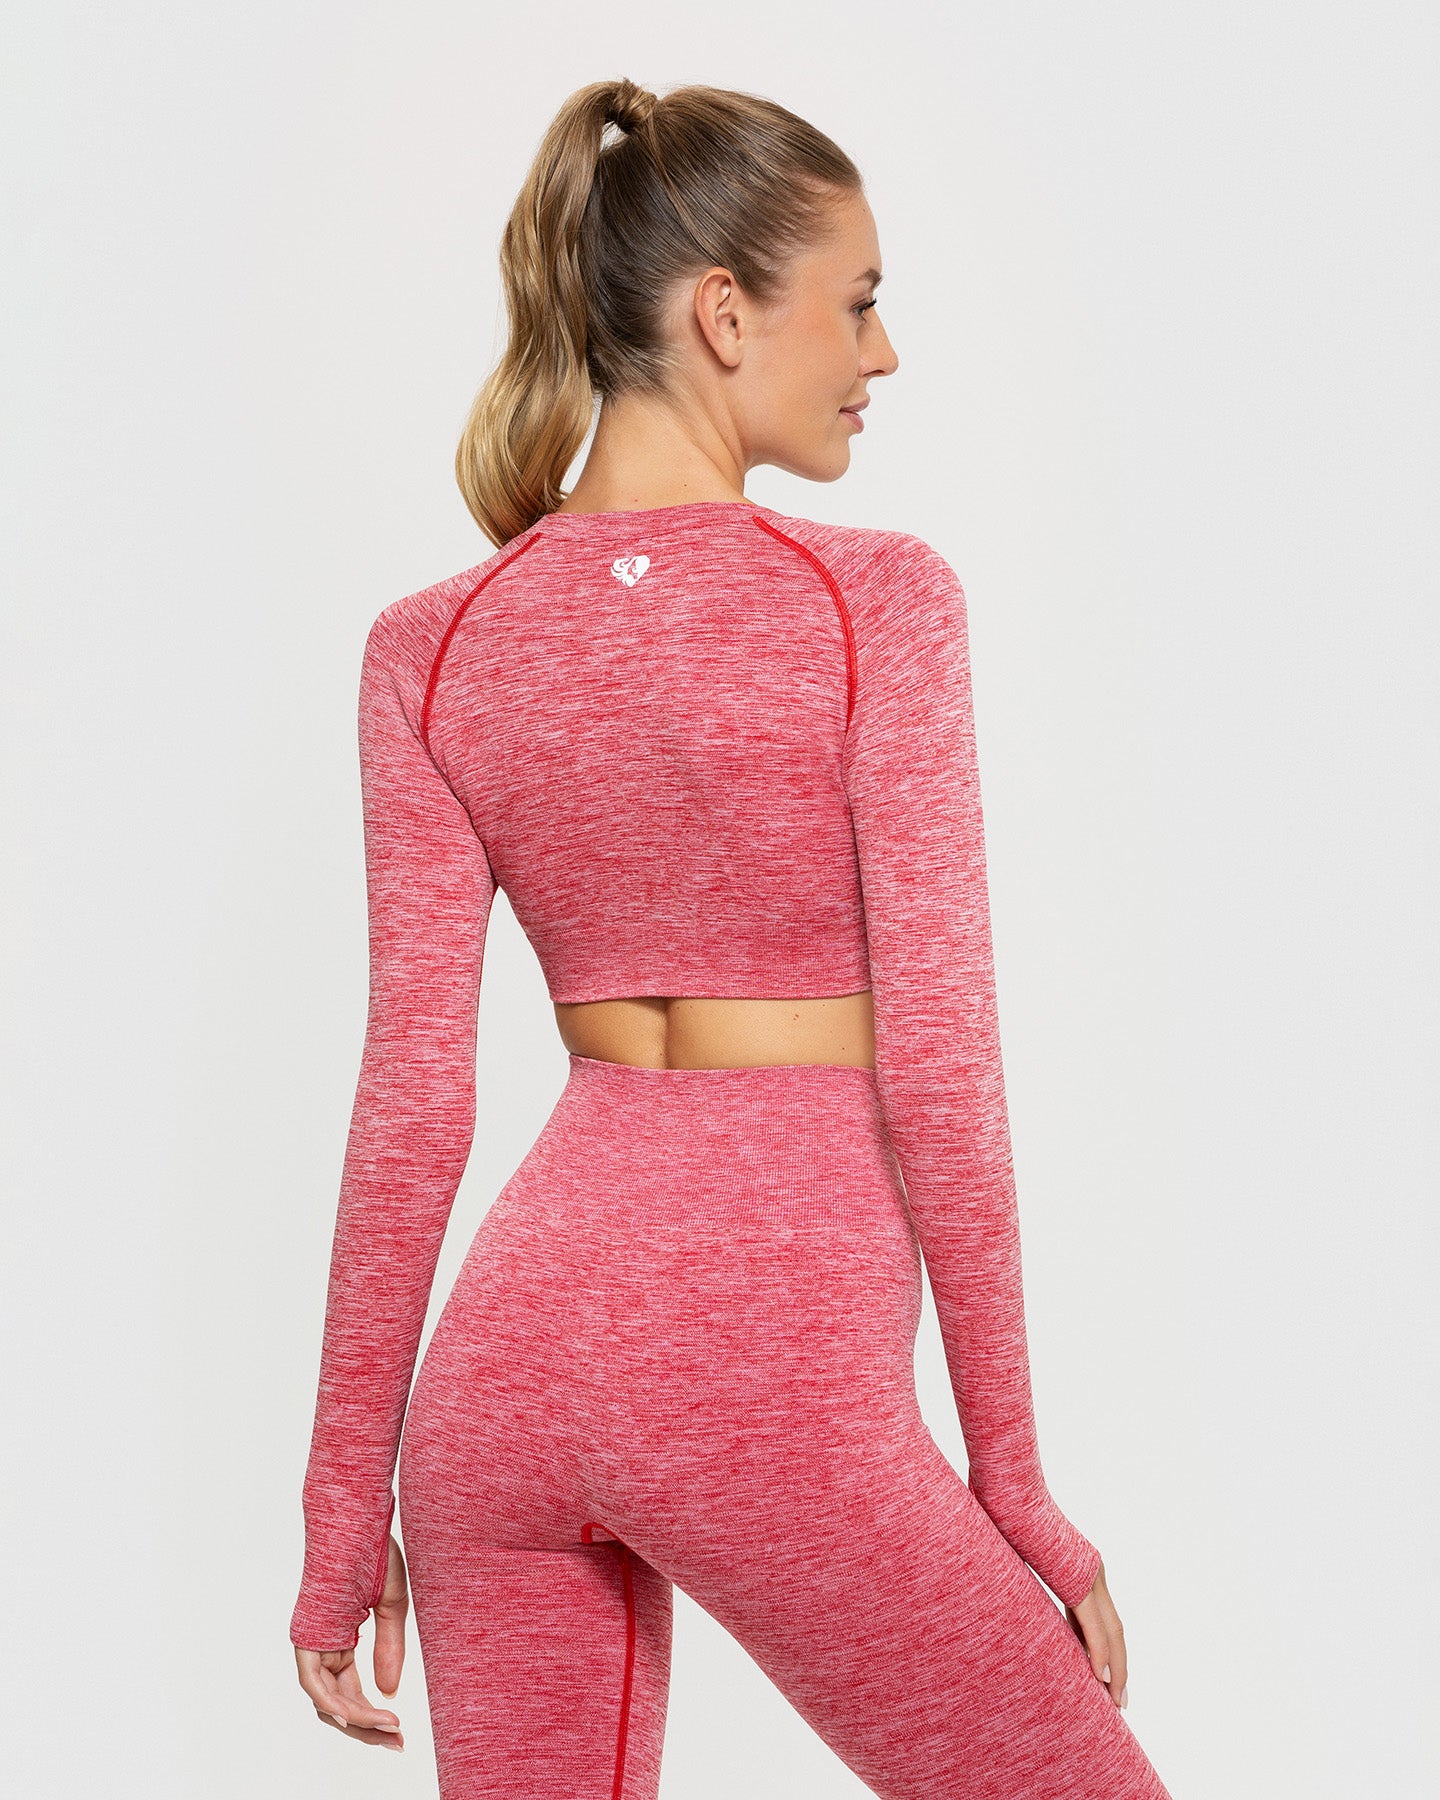 Fitness Accessories Shop for Women